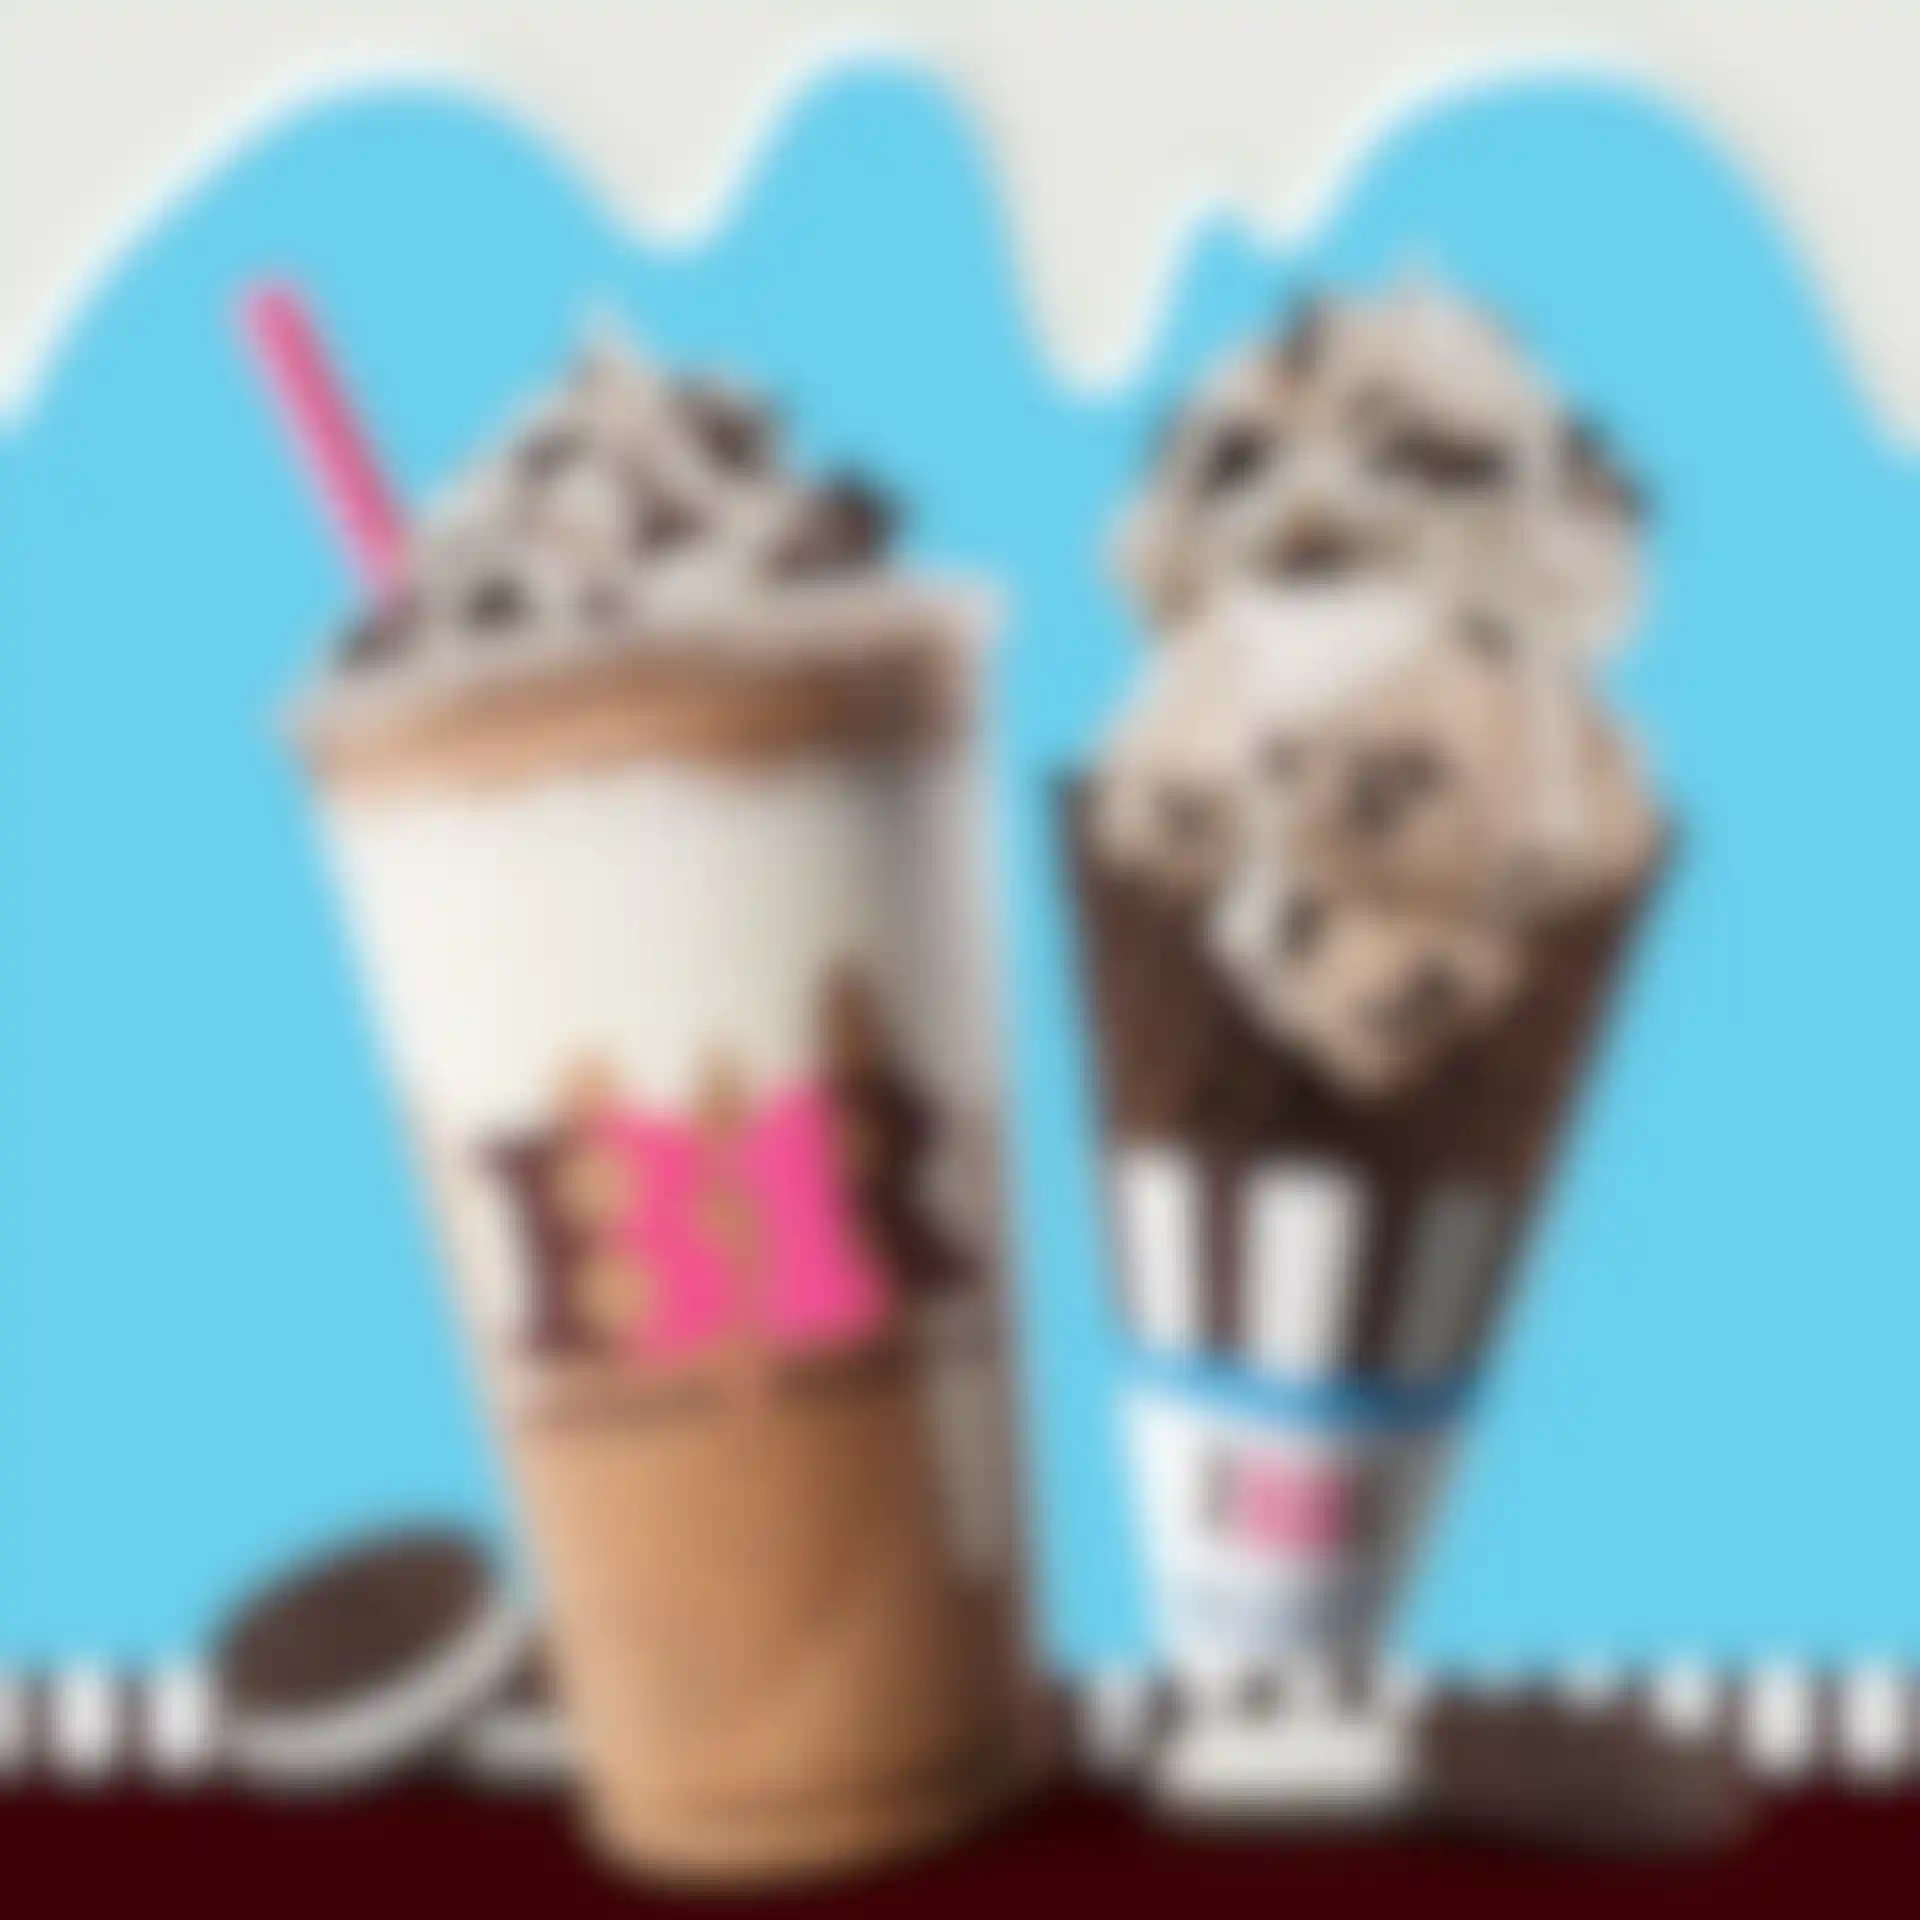 Baskin and Robbins Advert Voice Over Recording